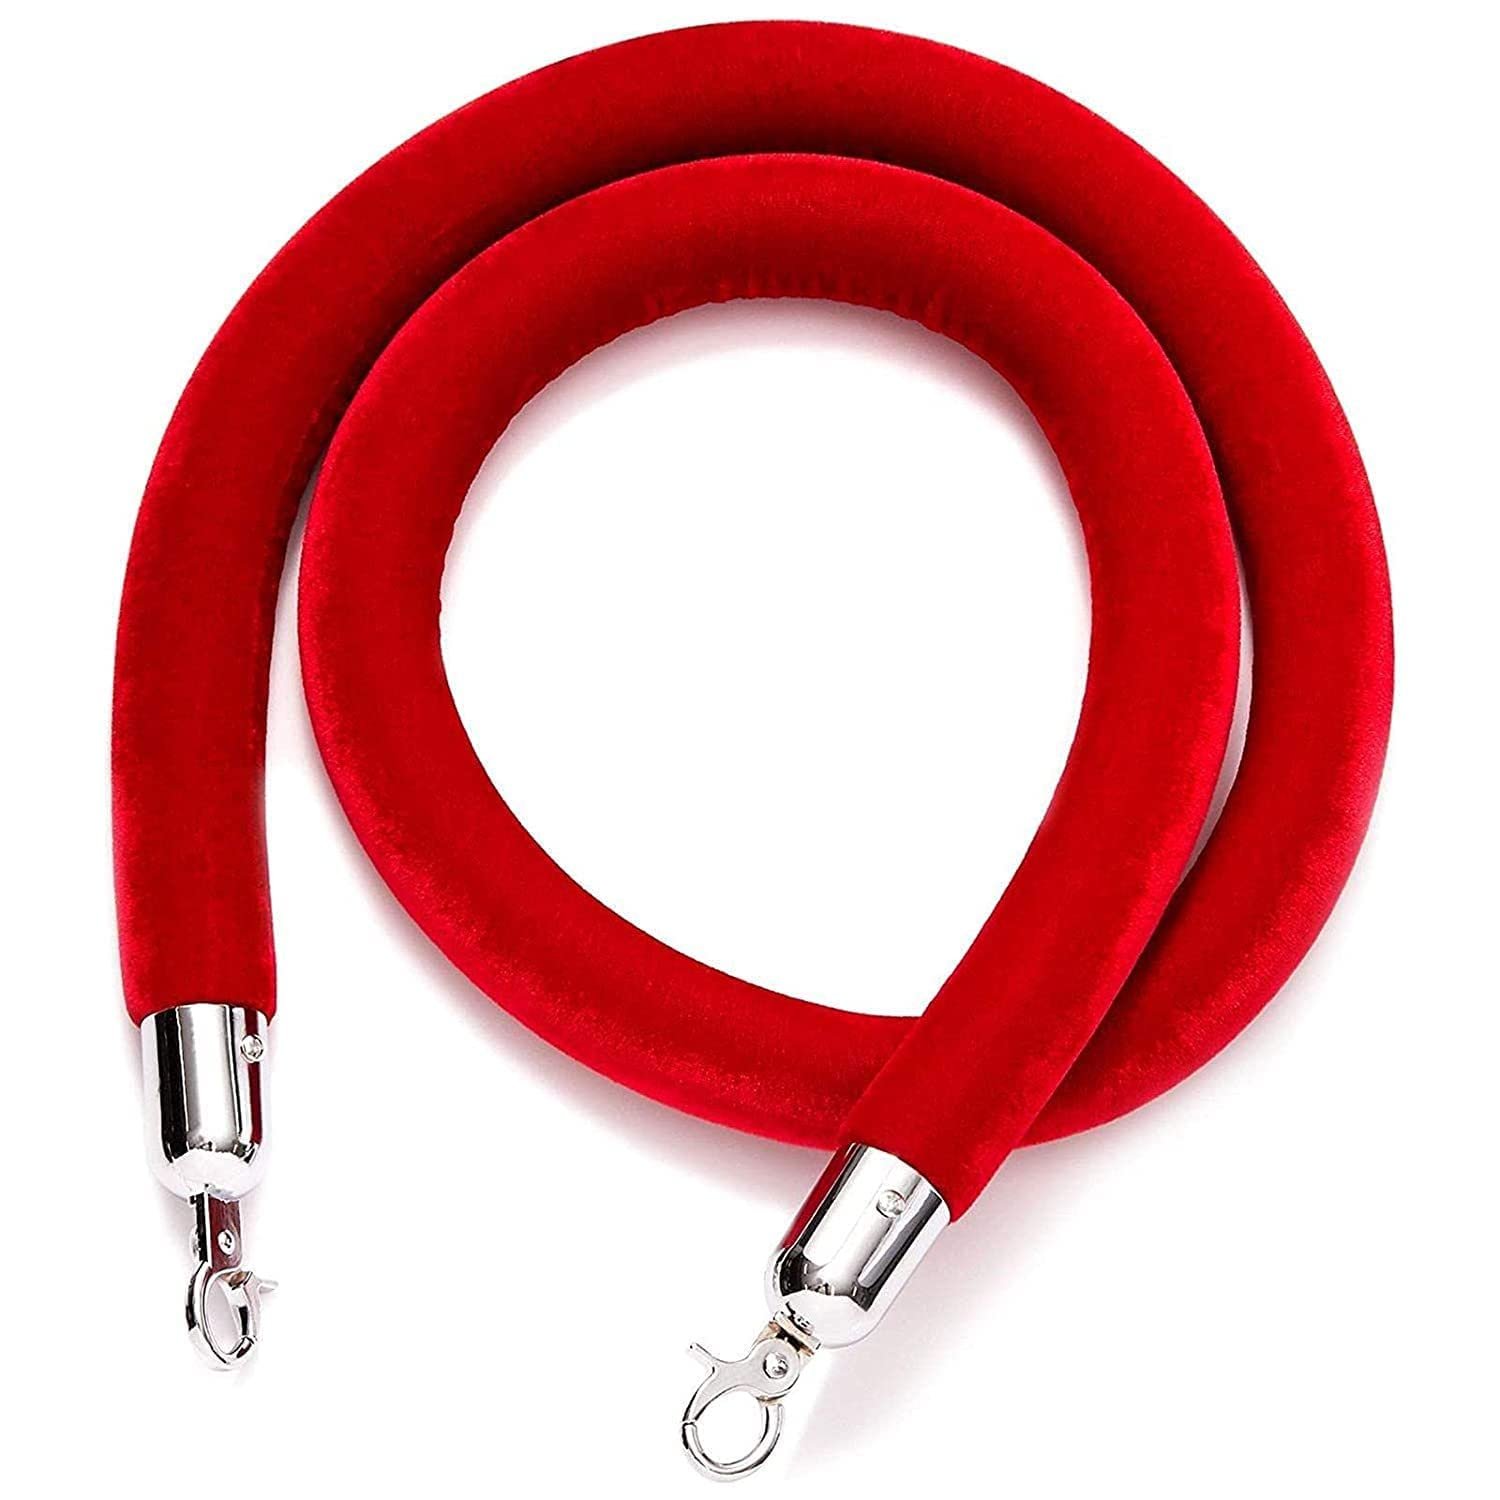 Ladwa 1.5m Crowd Control Red Velvet Rope With Silver Hooks